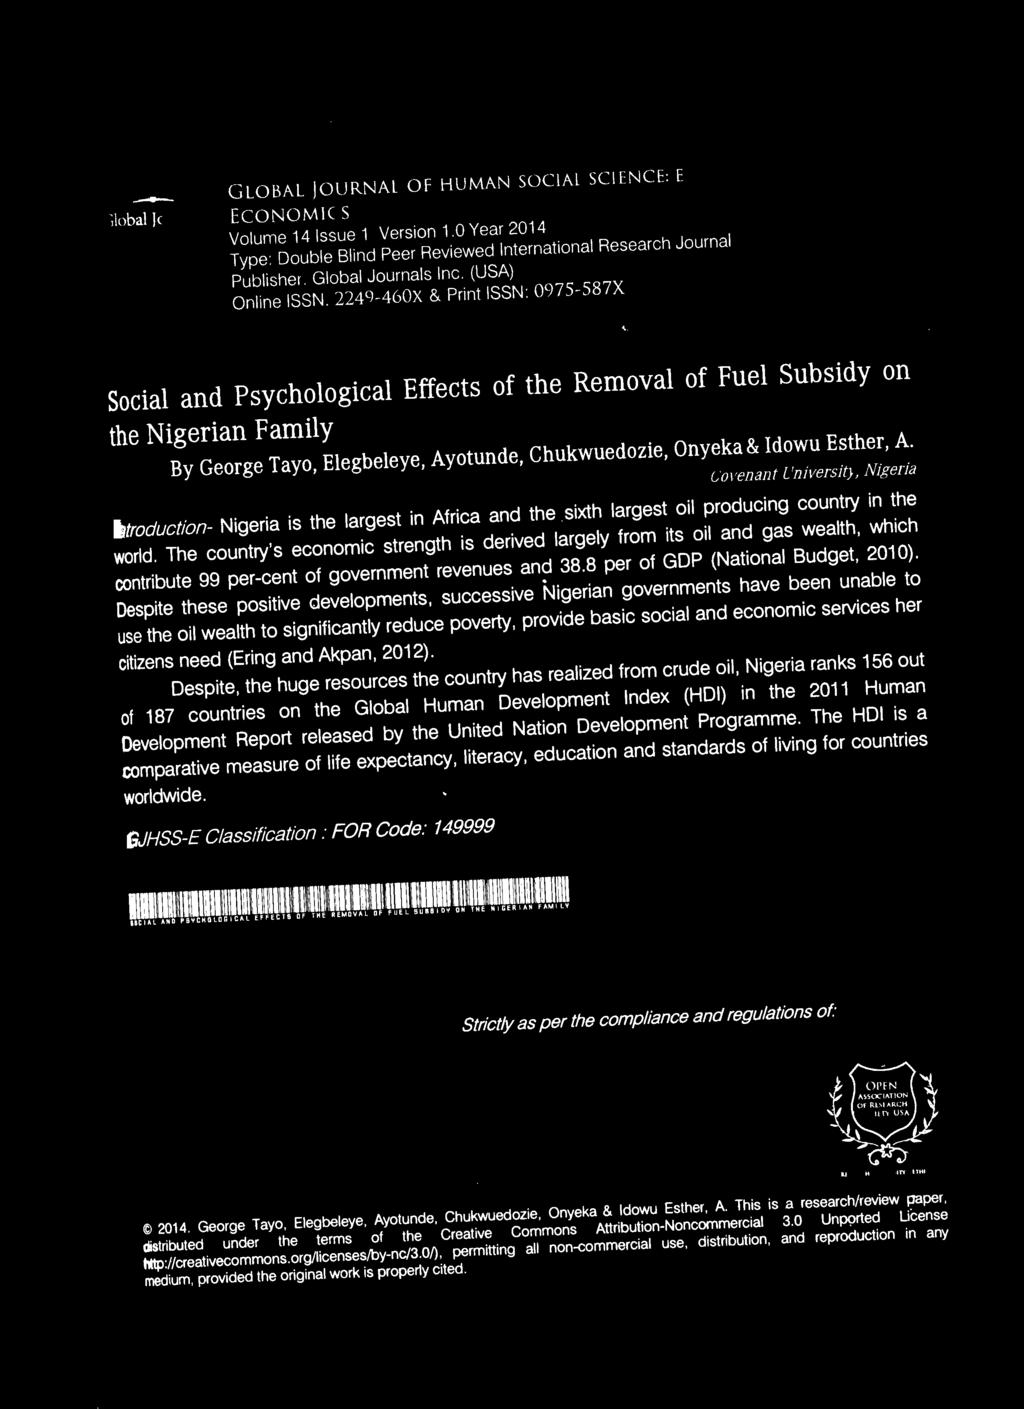 Psychological Effects of the Removal of Fuel Subsidy on the Nigerian Family By George Tayo, Elegbeleye, Ayotunde, Chukwuedozie, Onyeka & Idowu Esther, A. l 01 ('1/dllt L /111 [>/'<,/{)' _\'i;?